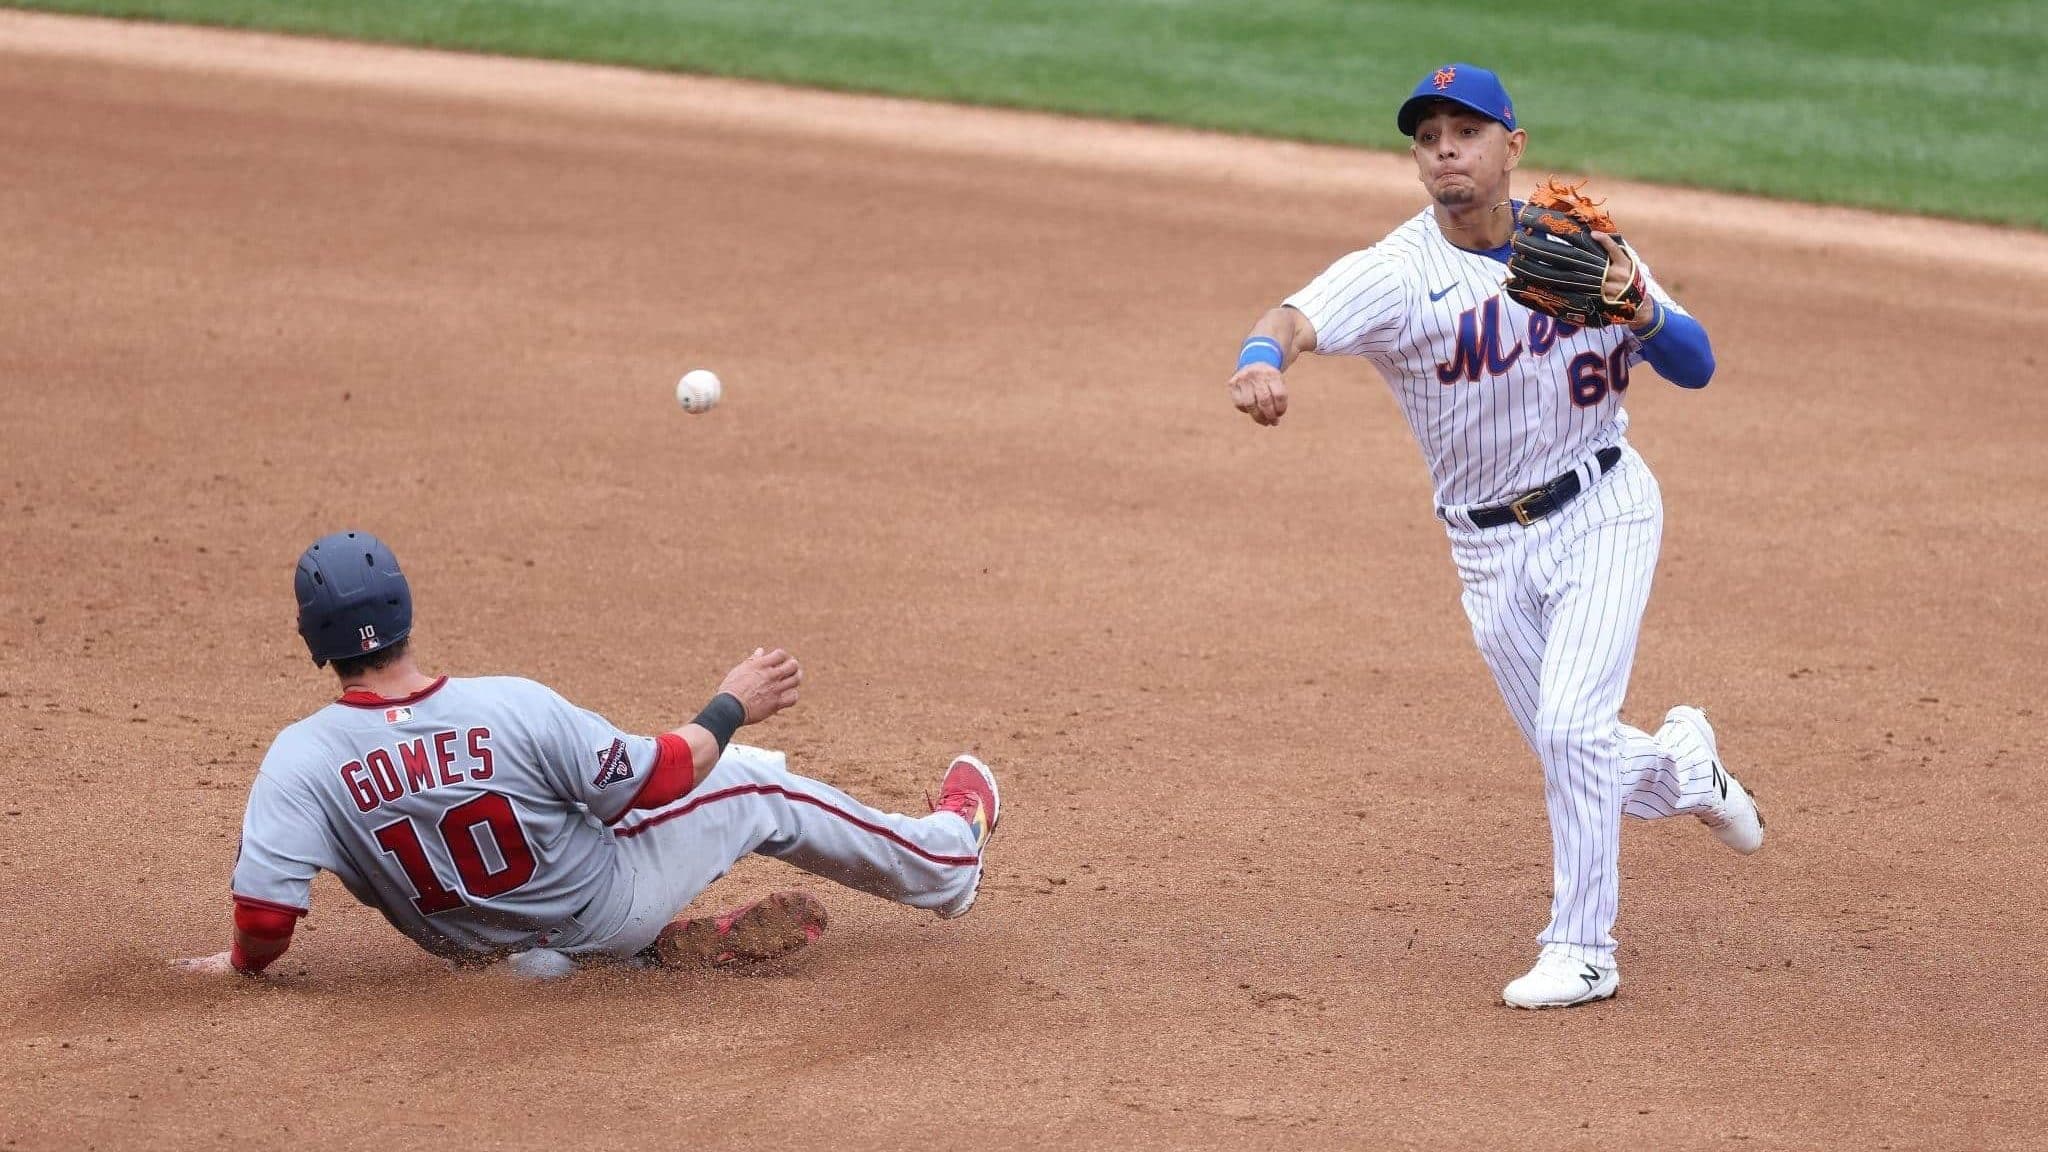 NEW YORK, NEW YORK - AUGUST 13: Andres Gimenez #60 of the New York Mets attempts to turn a double play against Yan Gomes #10 of the Washington Nationals during their game at Citi Field on August 13, 2020 in New York City.